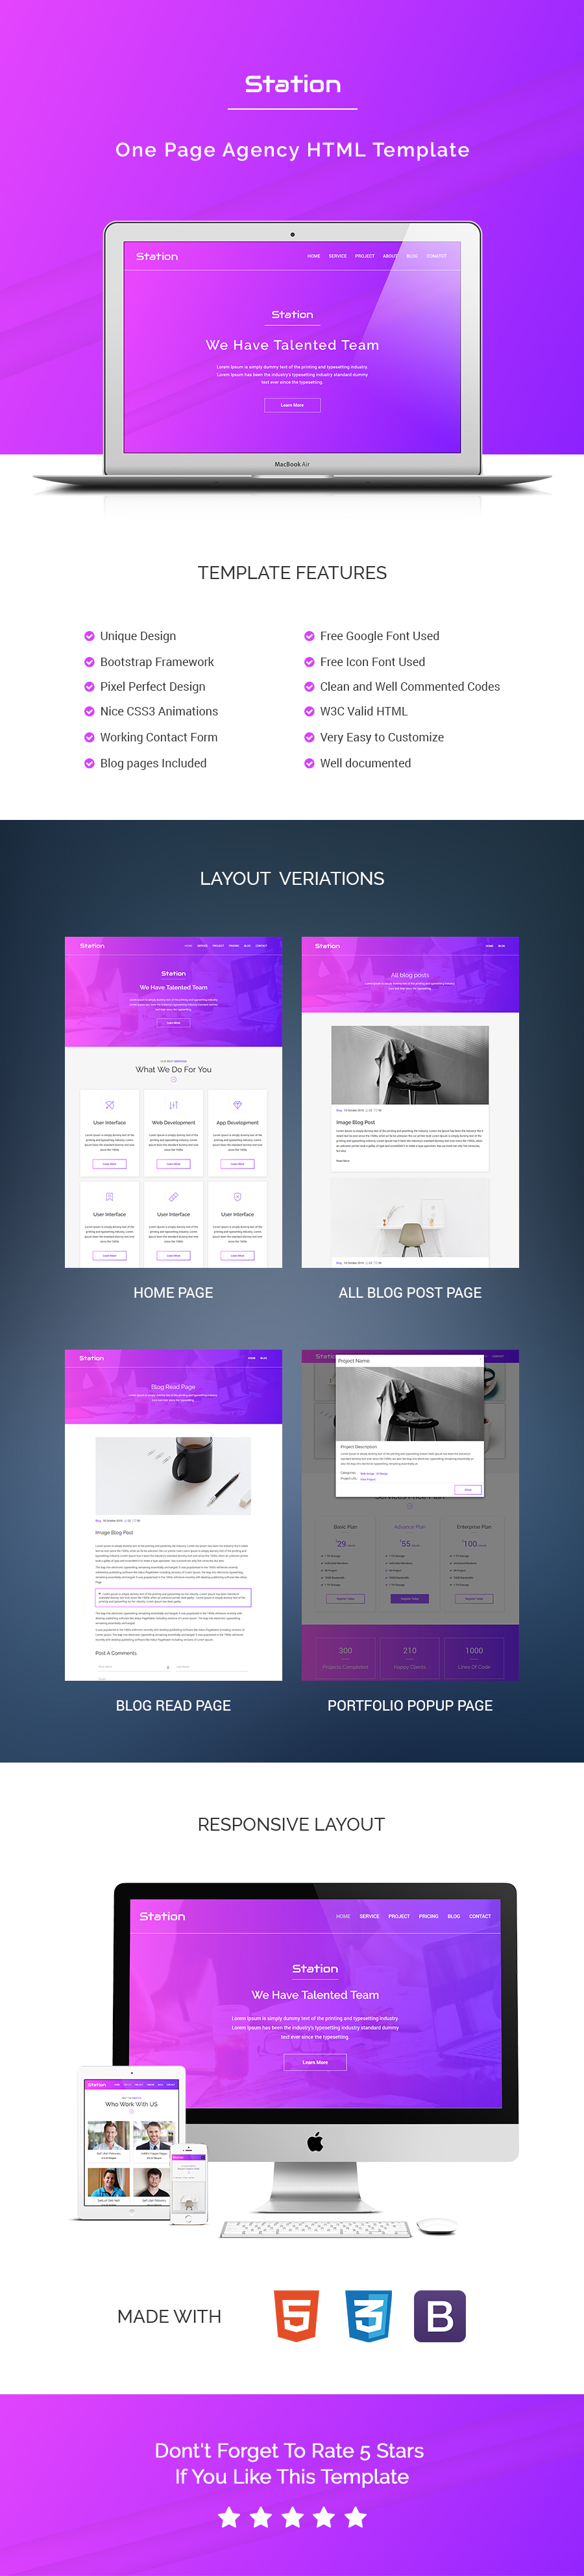 Station - Agency HTML Template - 1